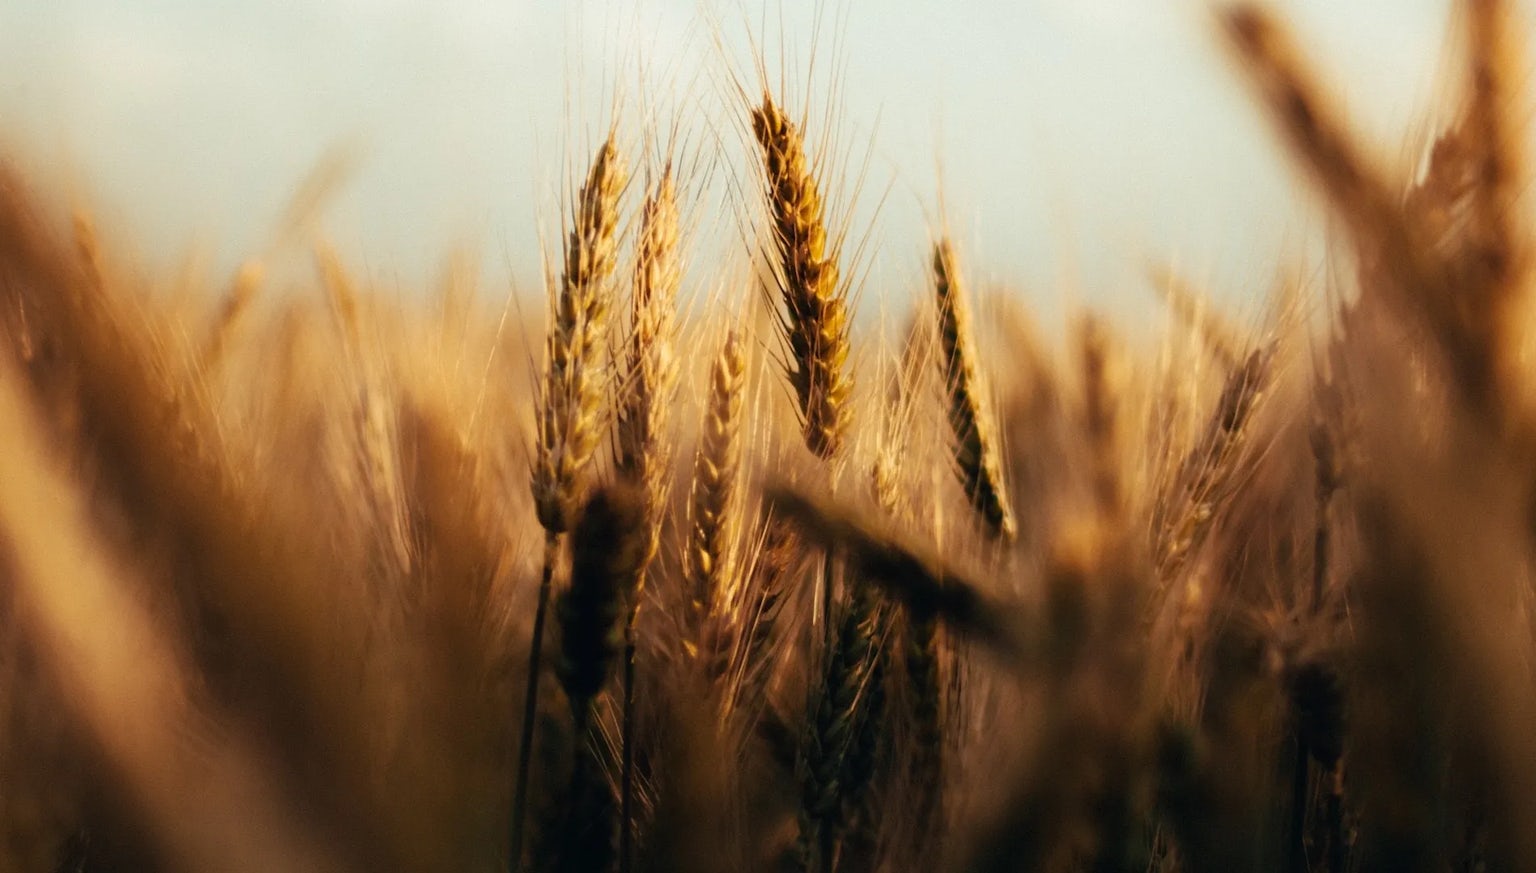 Wheat filed at sunset, close up on the ears of wheat